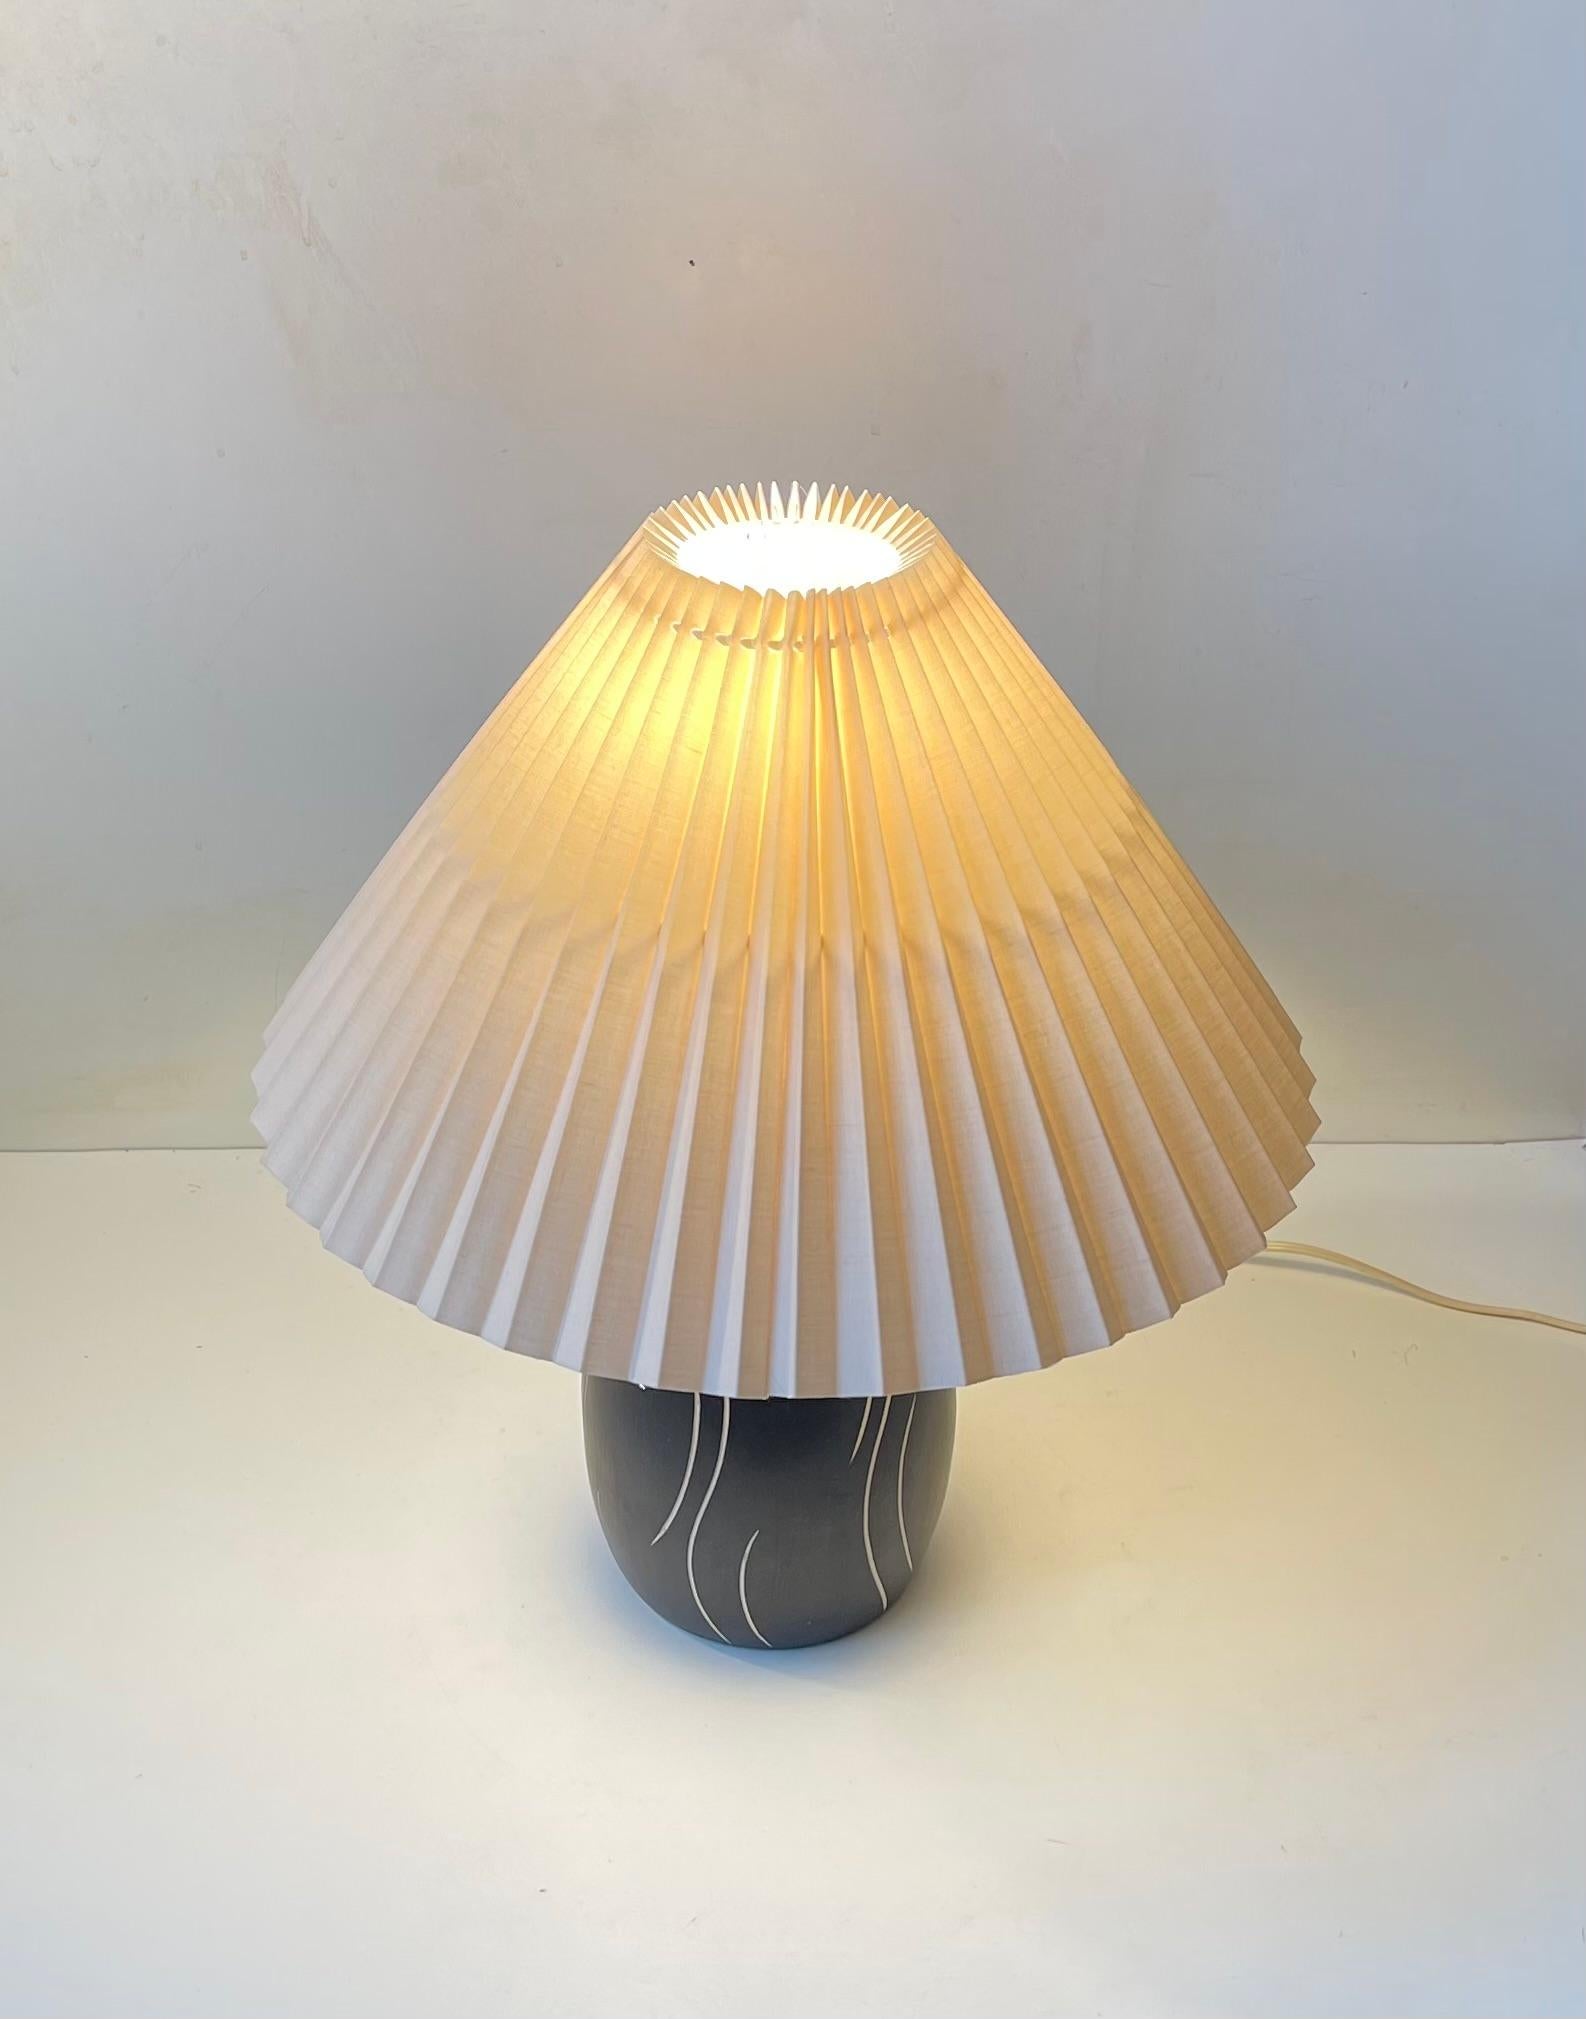 Scandinavian Modern Black White Sgrafitto Table Lamp by Elisabeth Loholt, 1950s In Good Condition For Sale In Esbjerg, DK